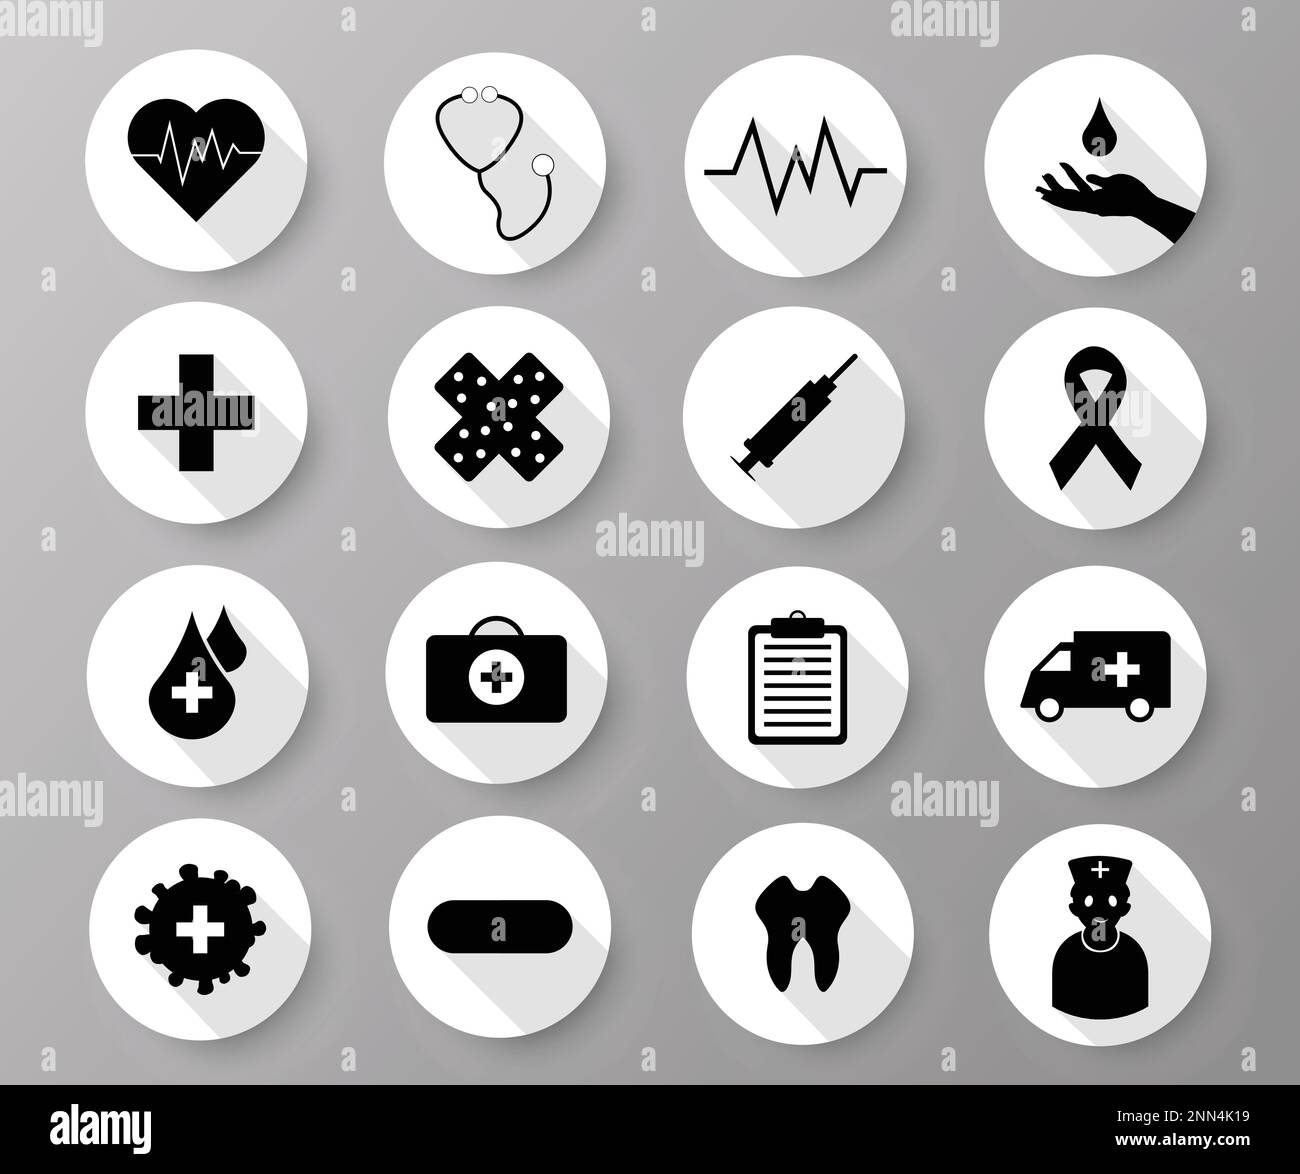 Medical kit black and white icons vector illustration isolated on white gradient background. Stock Vector